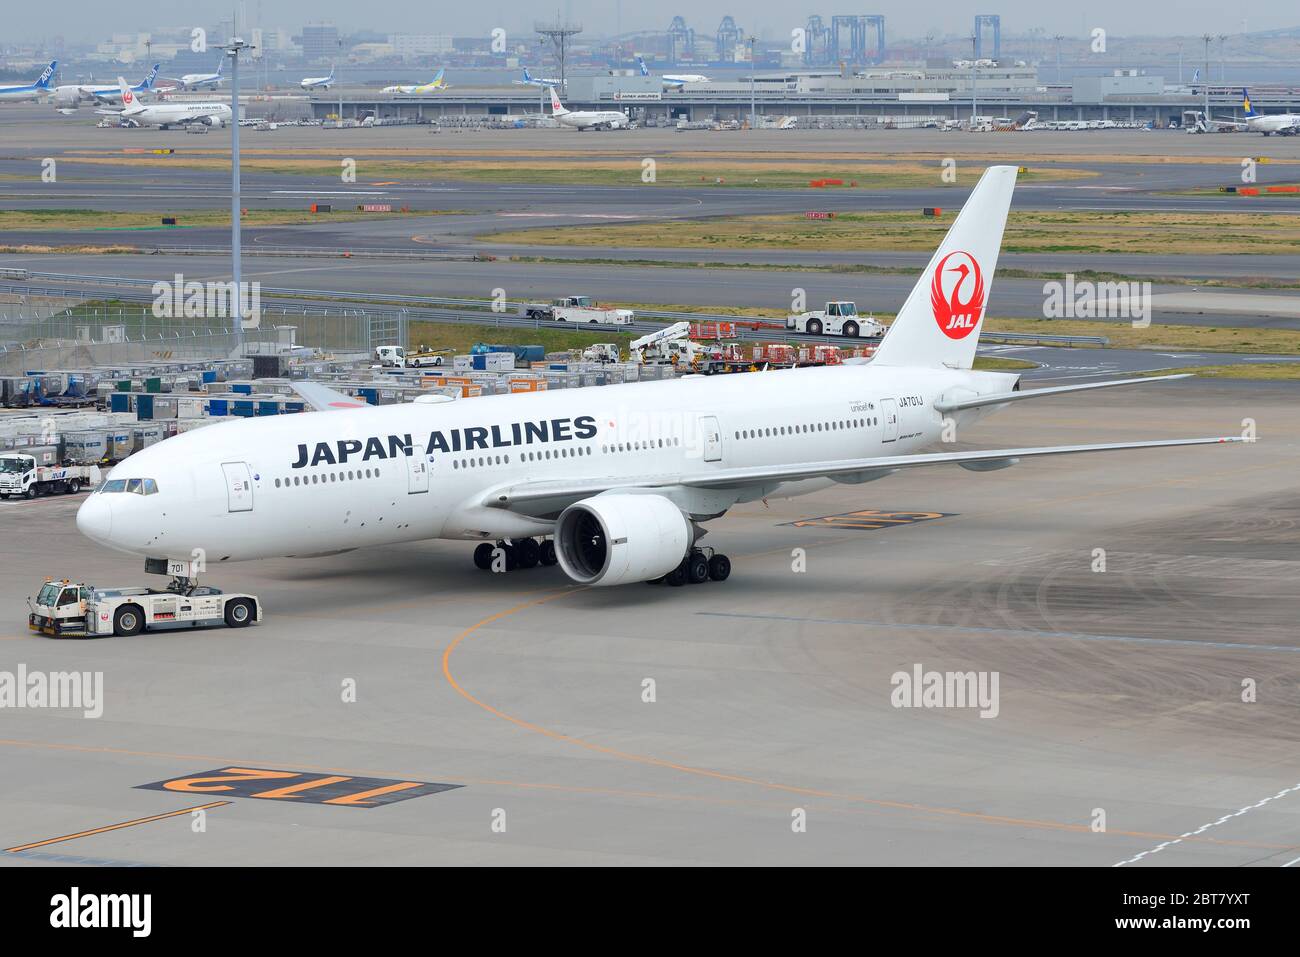 Japan Airlines Boeing 777 JA701J being pushed back at Tokyo Haneda International Airport (HND). Aircraft 777-200 of Japanese airline know as JAL. Stock Photo